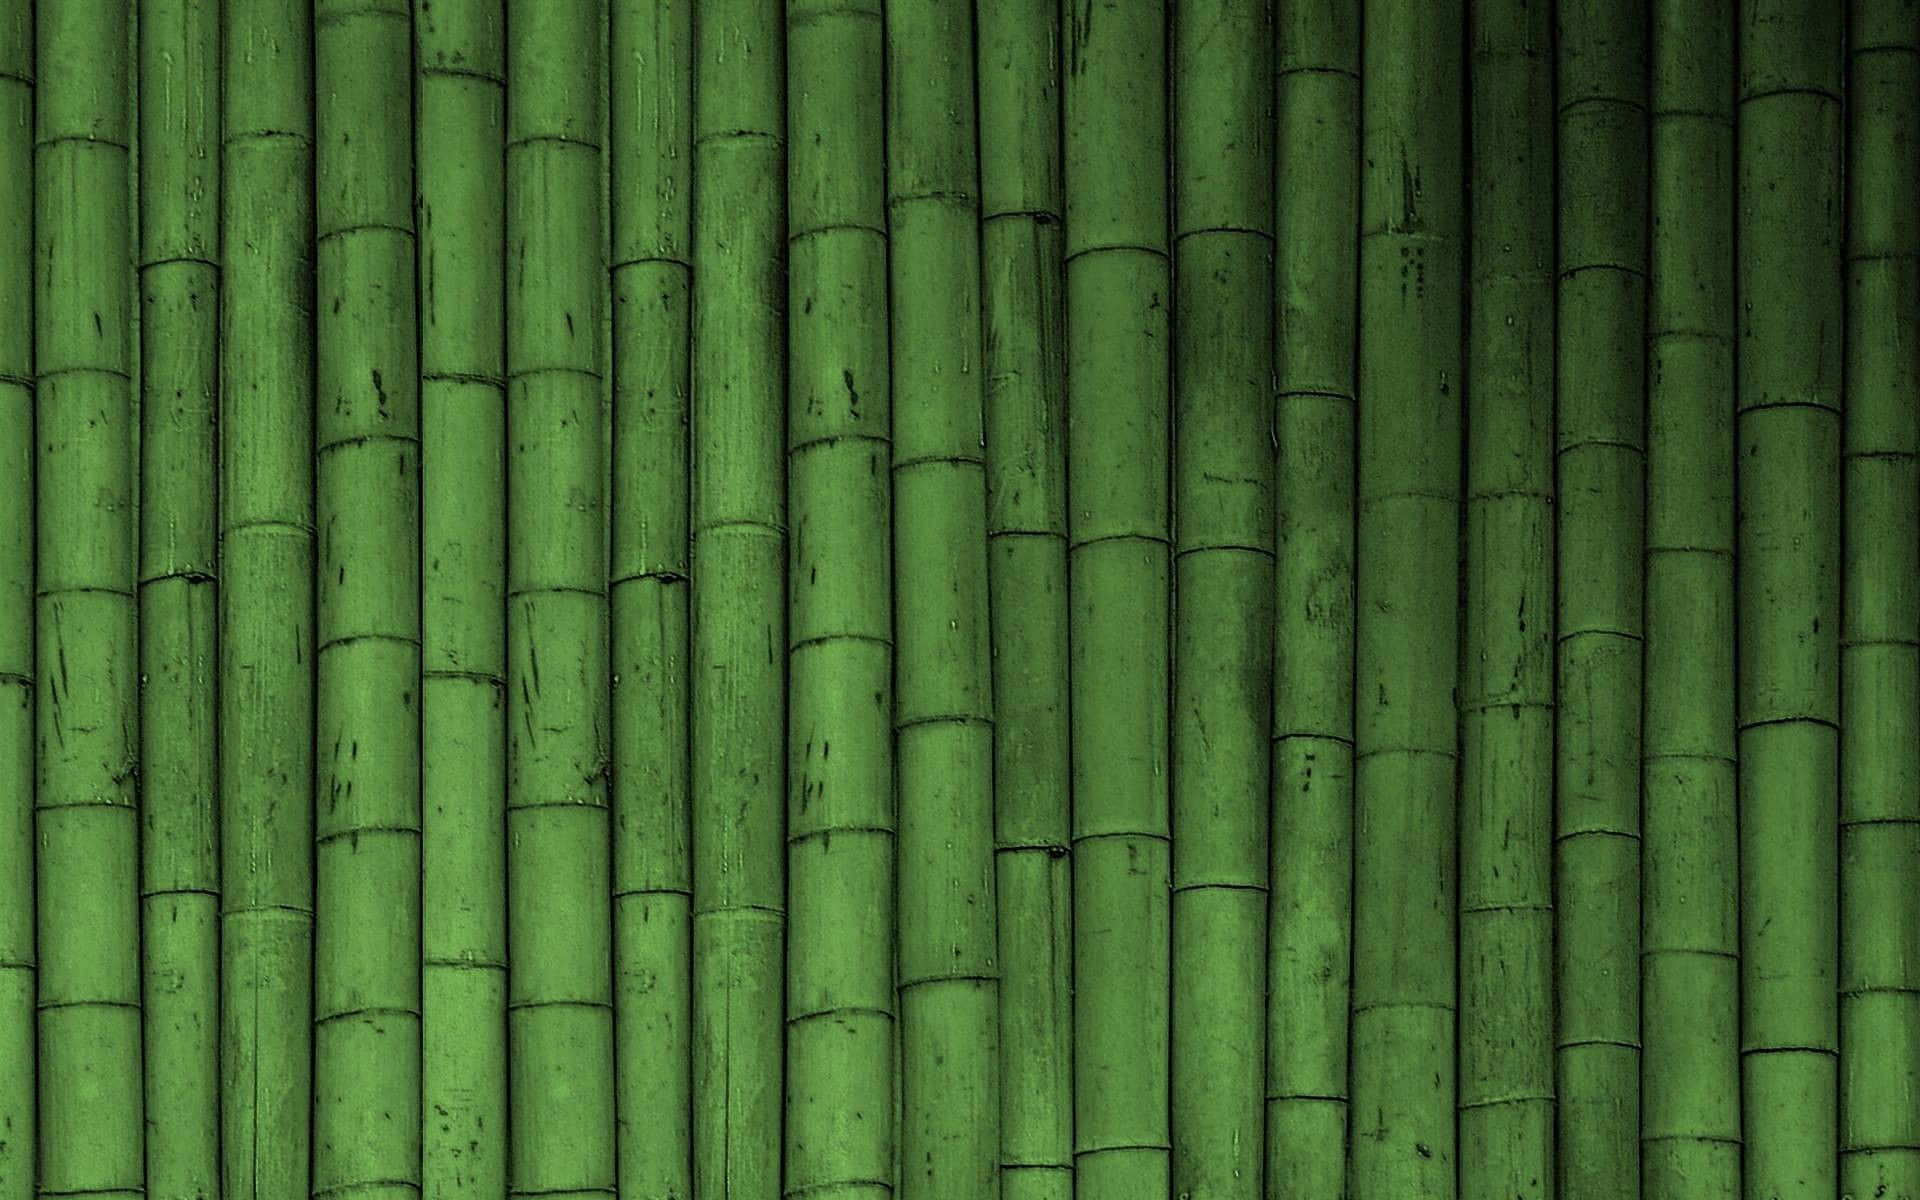 An image of a tranquil green bamboo forest Wallpaper